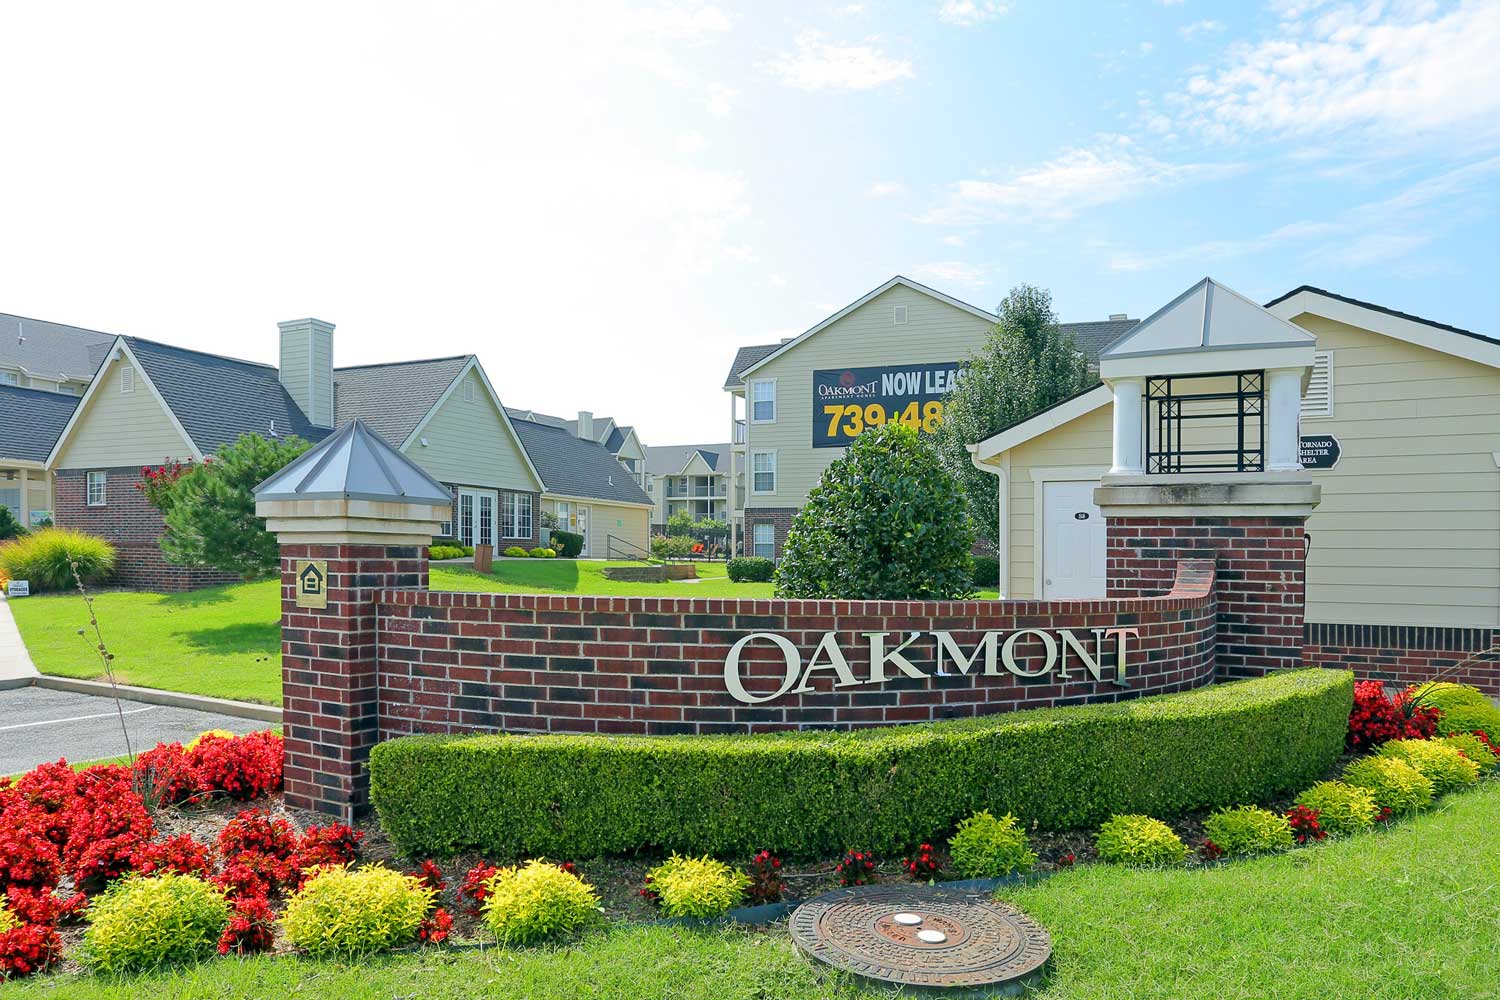 Property Signs at the Oakmont Apartment Homes